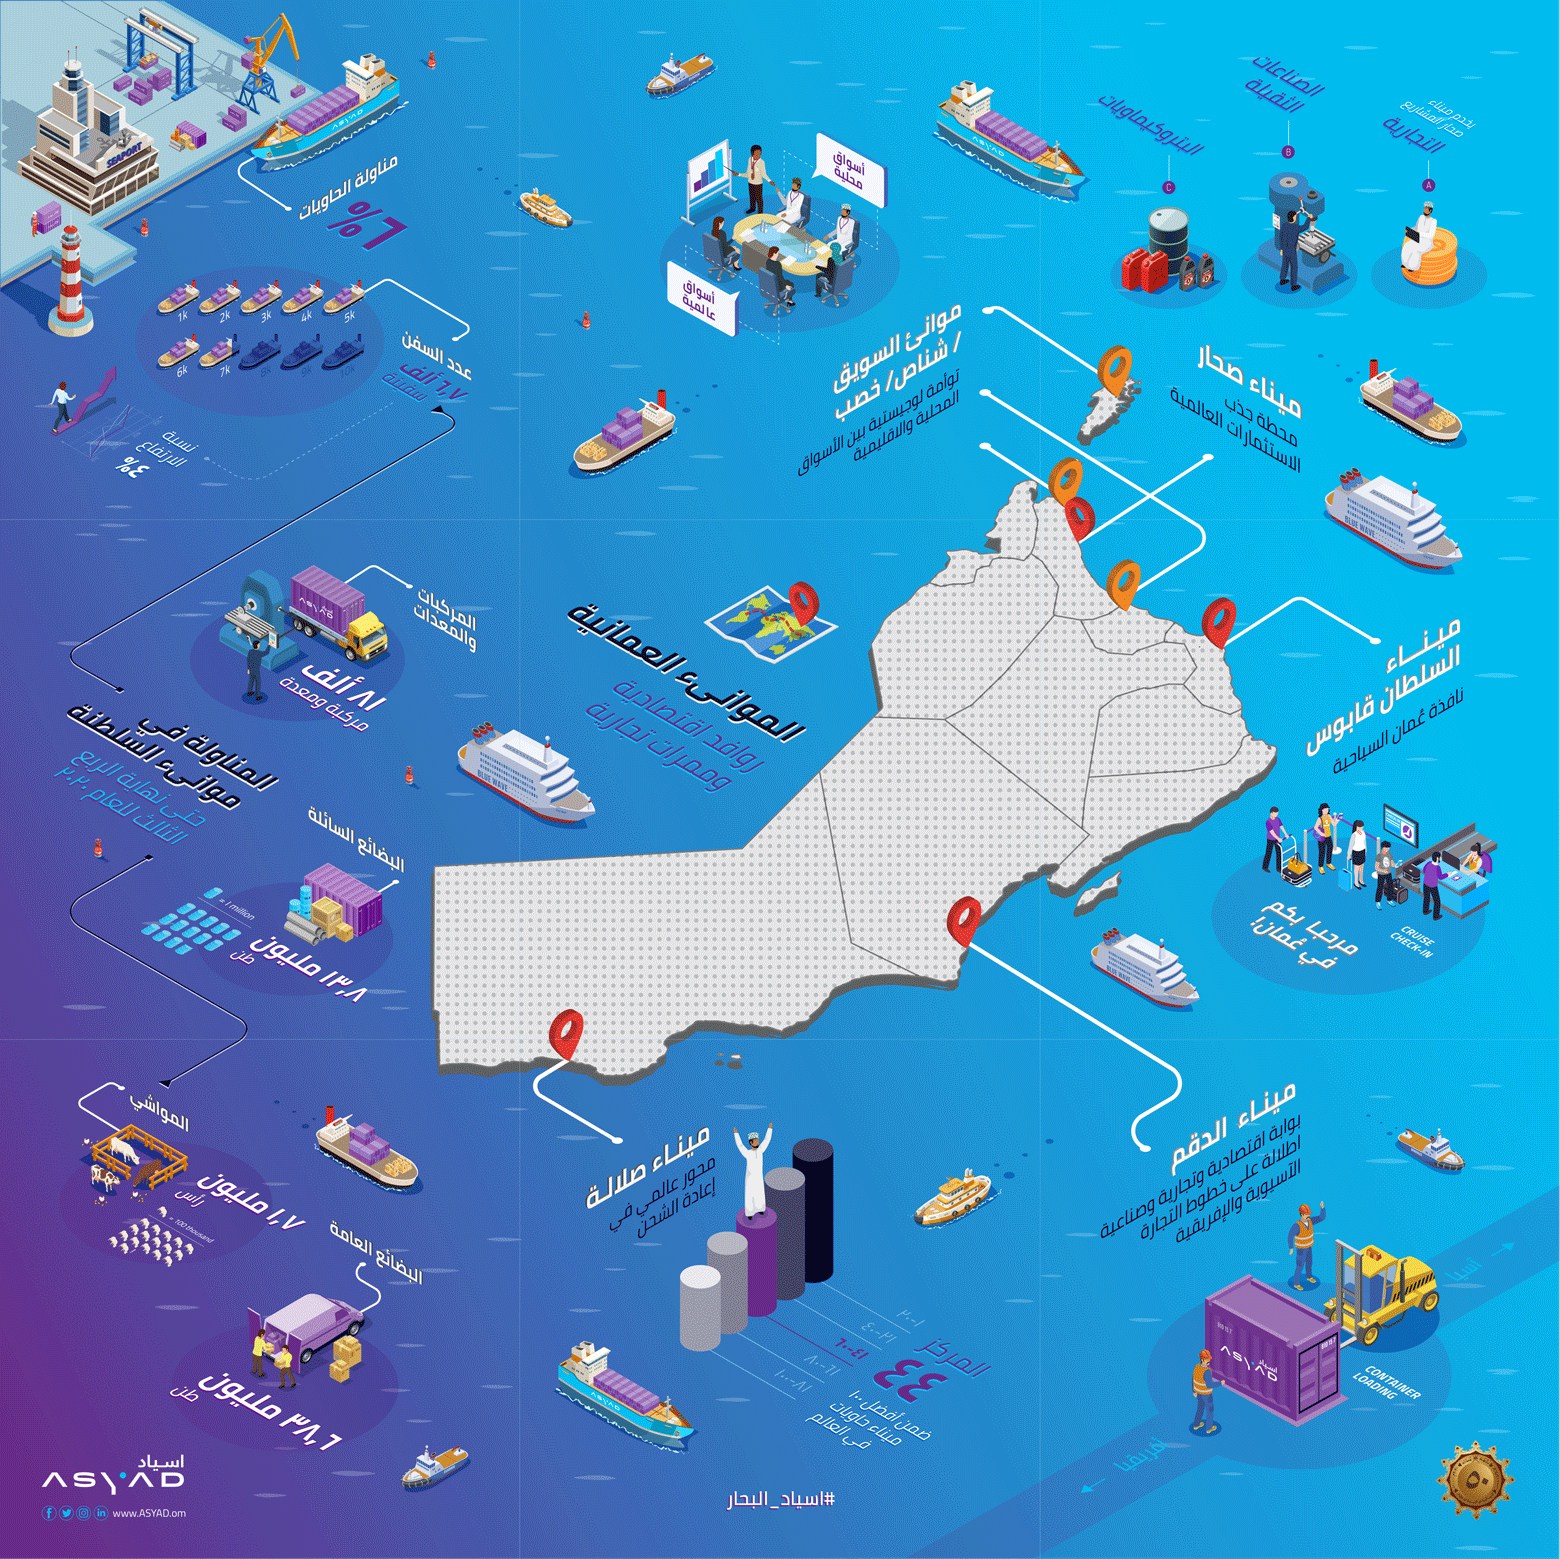 Wafa’ highlighted brand details in her isometric illustration of this campaign, apparent in the ships, containers, and human characters.